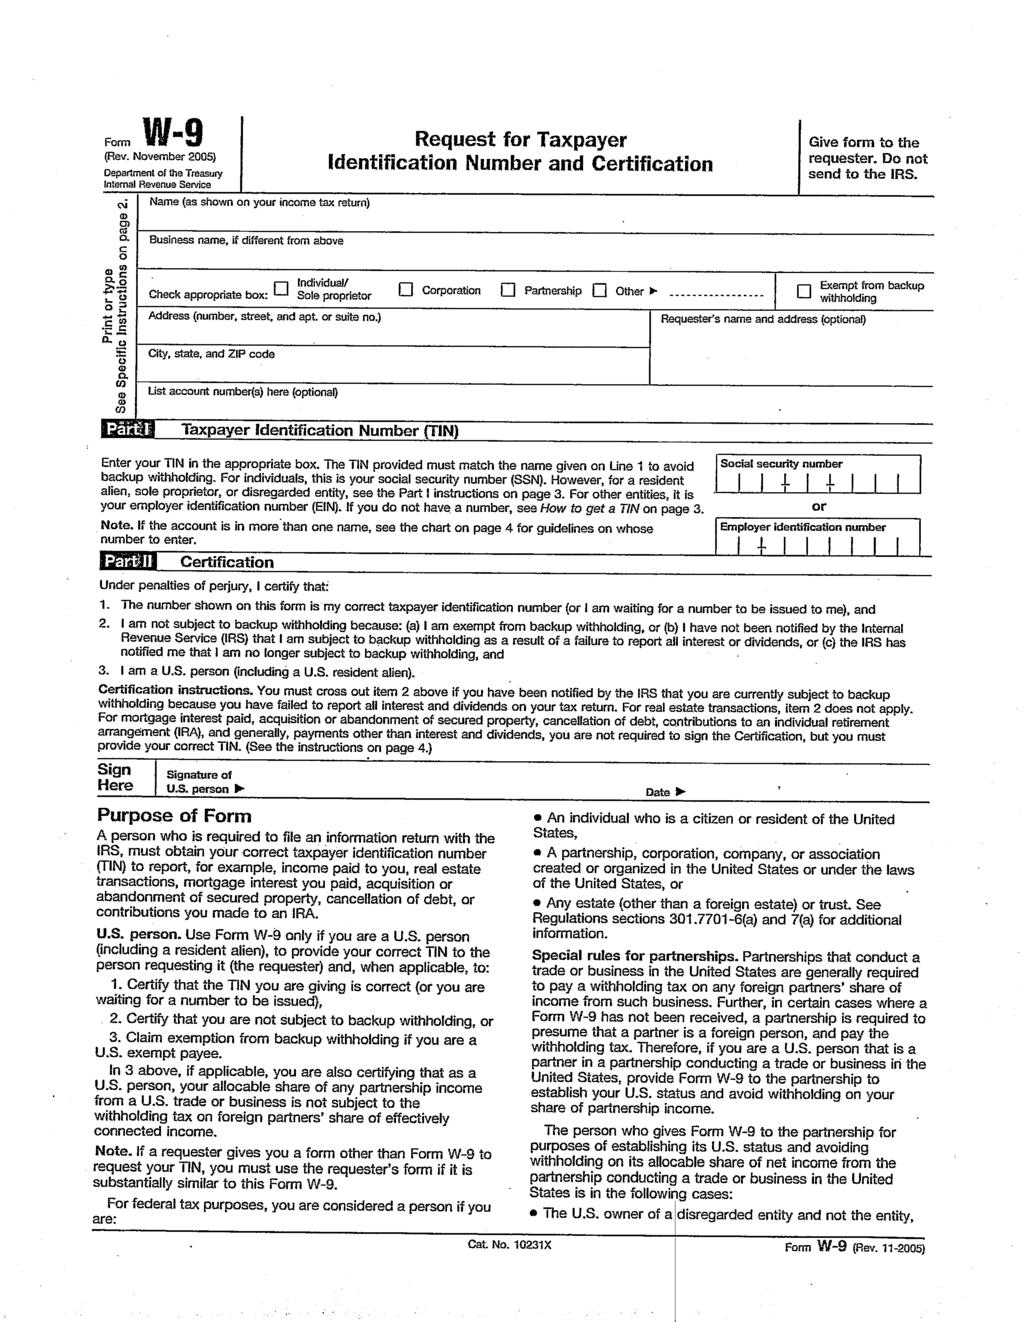 F W-9 (Rev. November 2005) Department of the Treasury Internal Revenue Service Print or type See Specific Instructions on page 2.